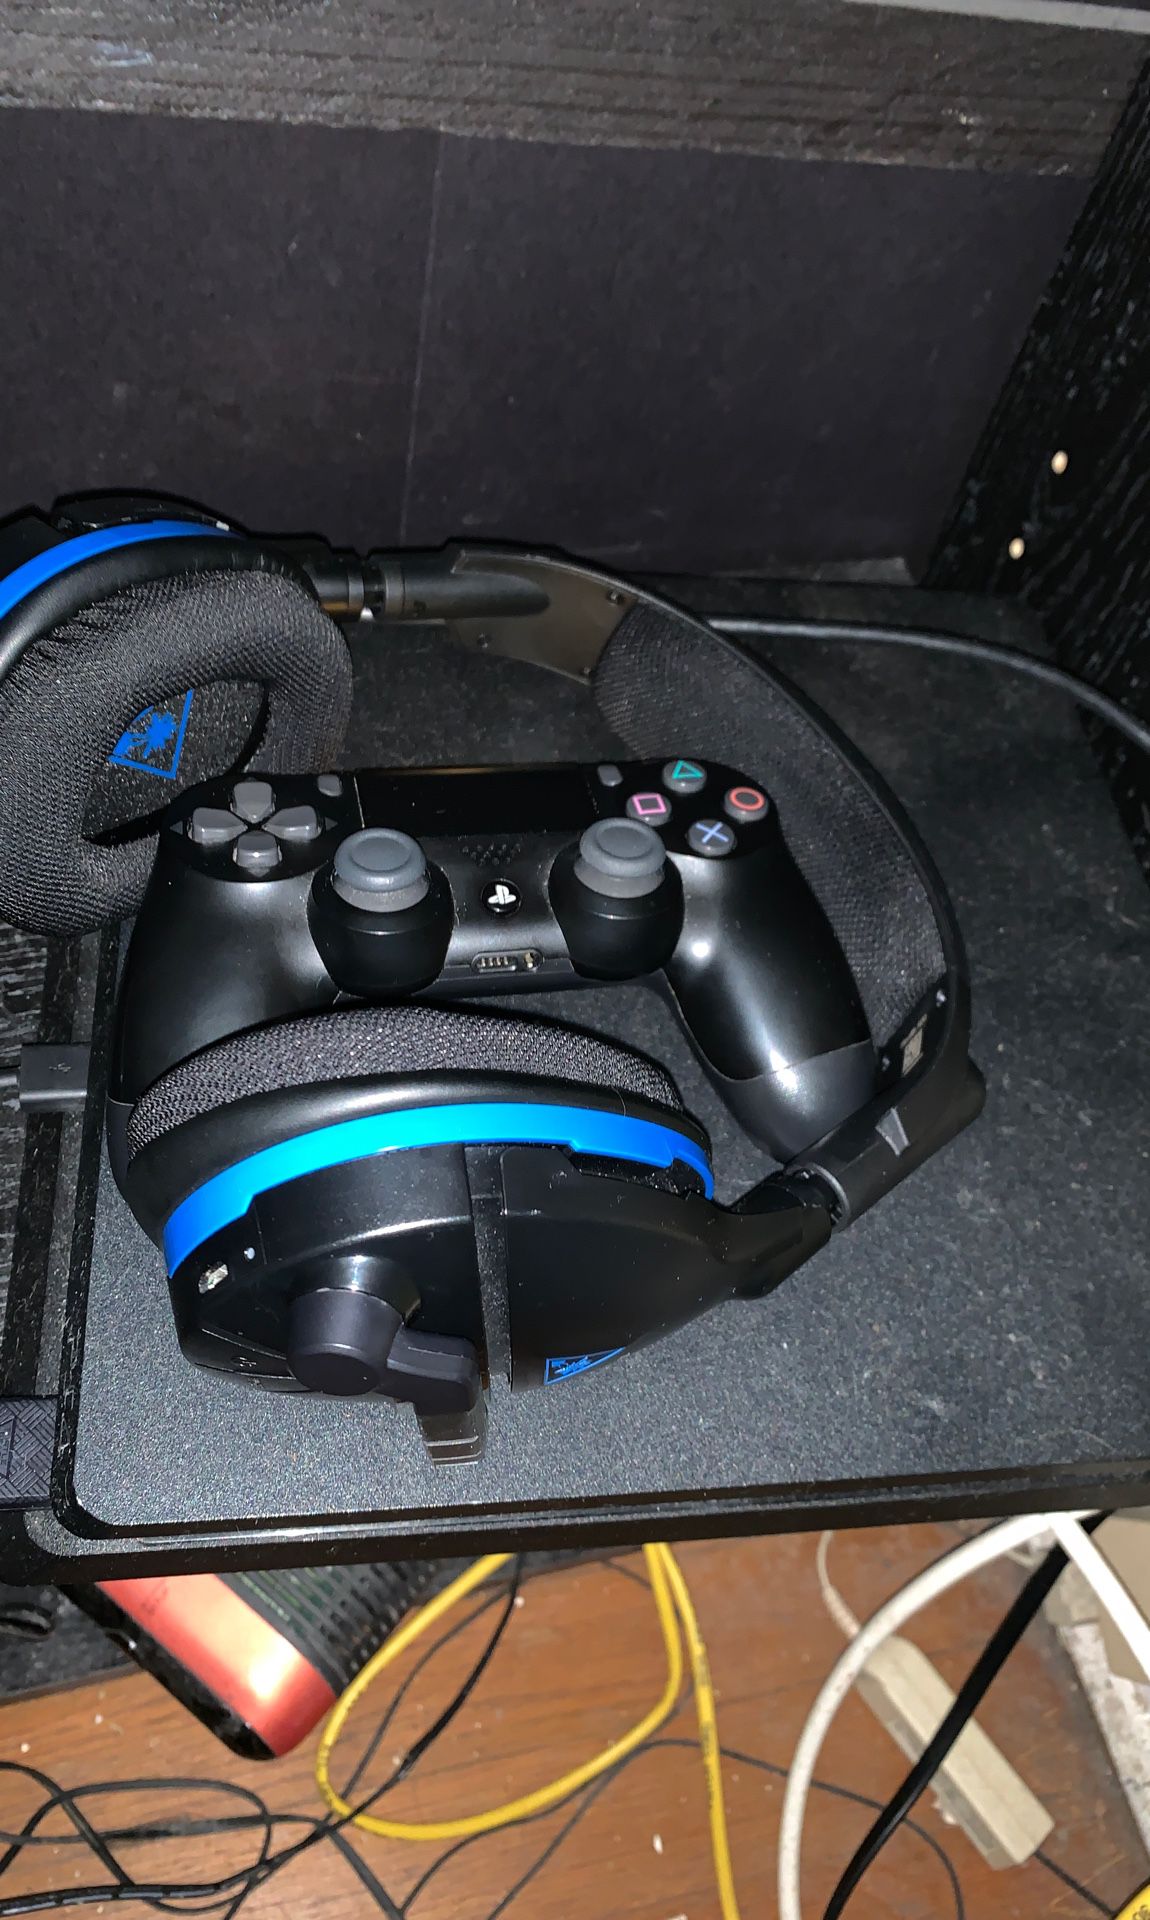 PlayStation 4 w/ turtle beach headset and dual charger